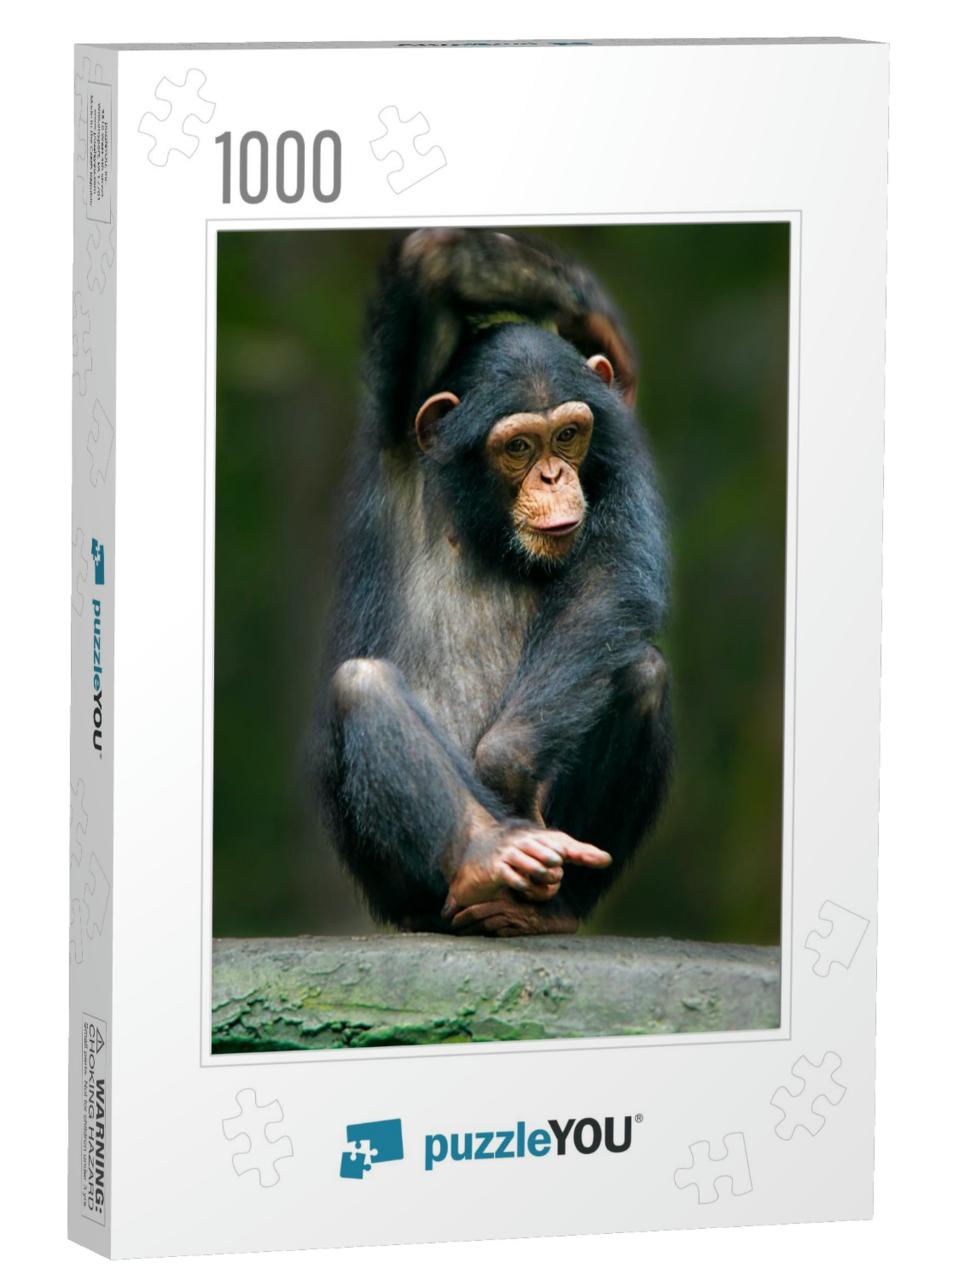 The Chimpanzee Pan Troglodytes, Also Known as the Common... Jigsaw Puzzle with 1000 pieces